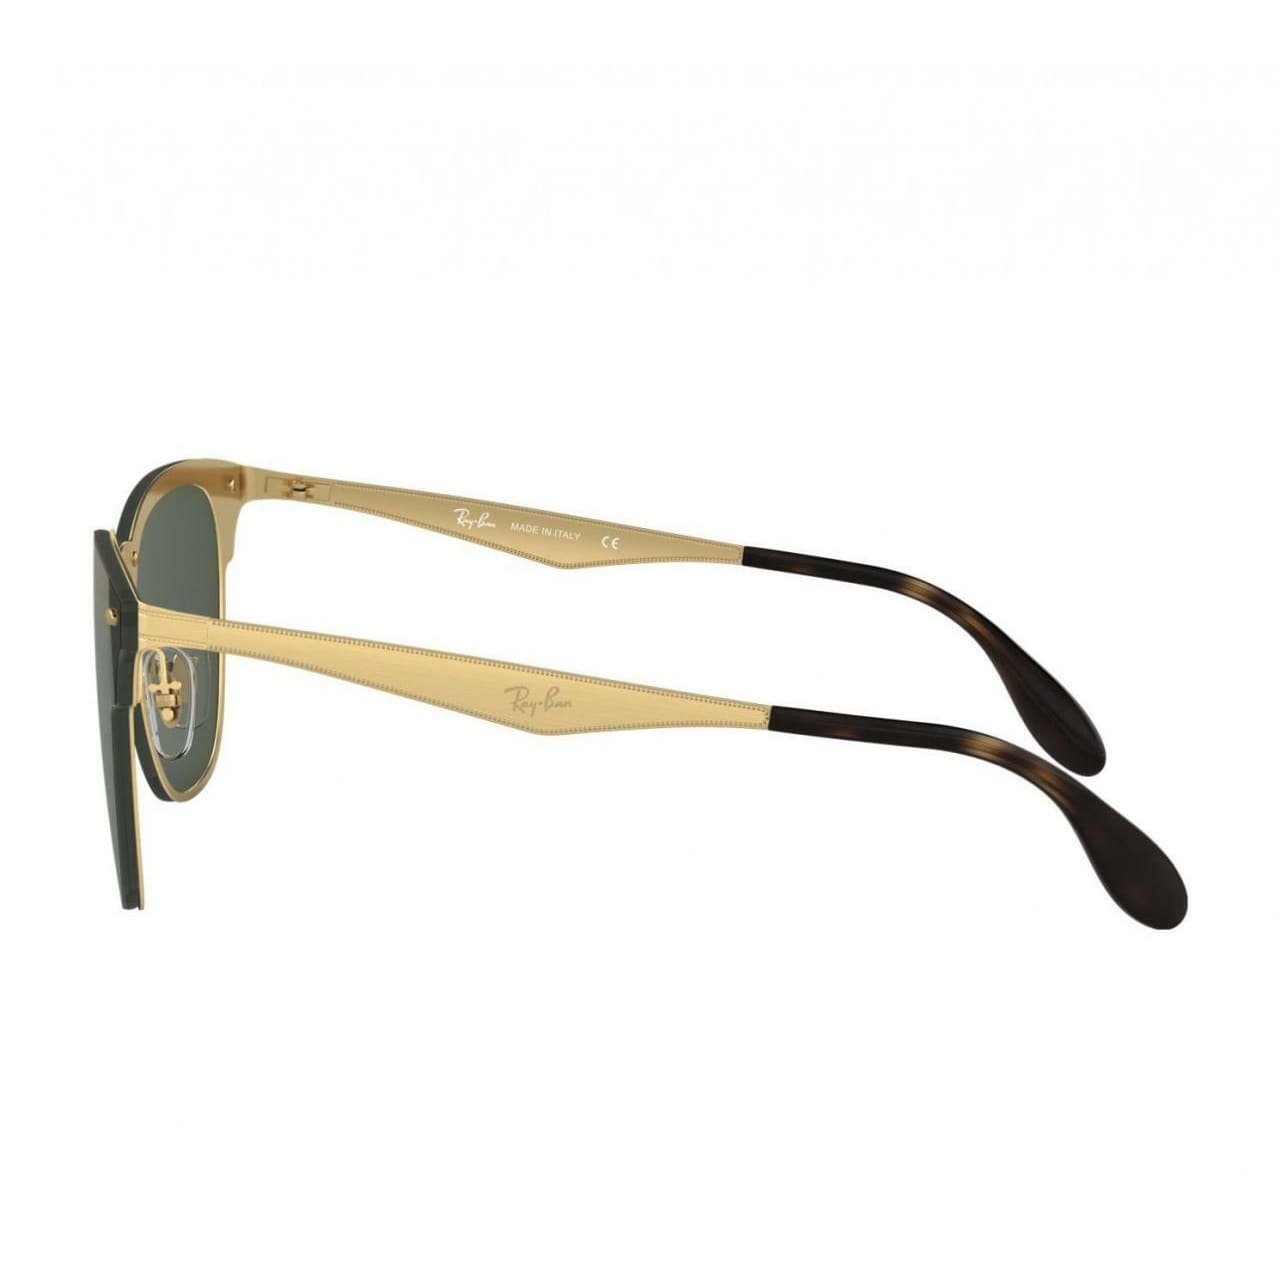 Ray-Ban RB3576N-043/71 Gold Square Green Classic Metal Sunglasses Frames 8053672763140